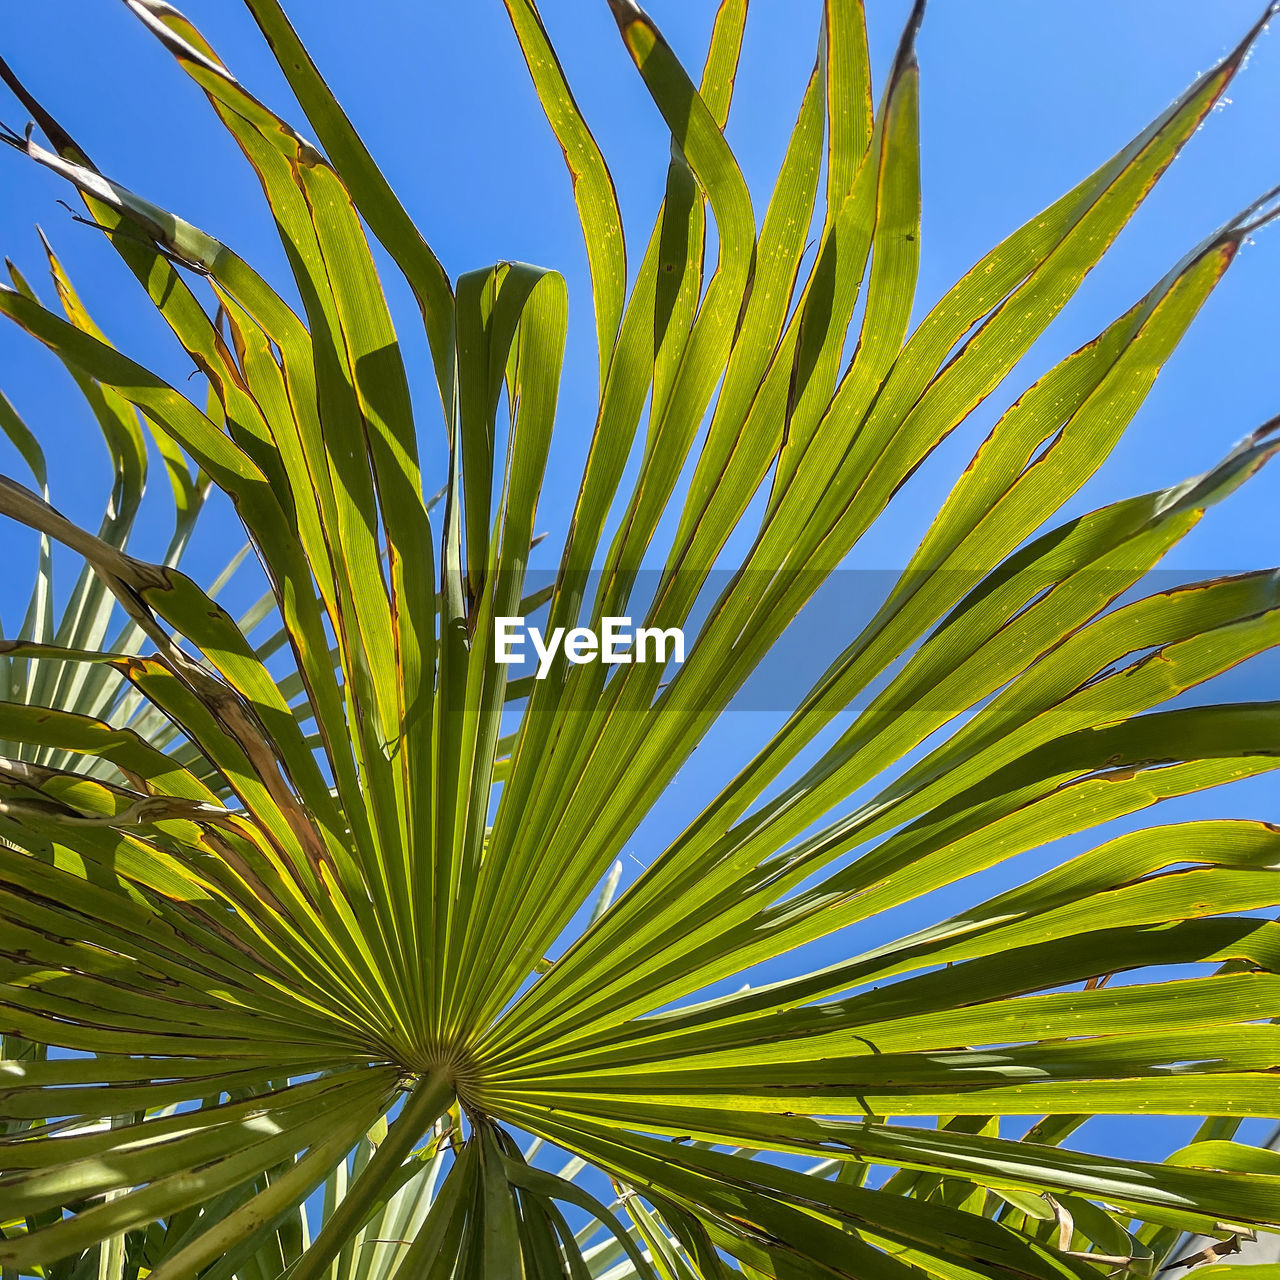 A group of palm trees next to a tree on the cloudless sky.